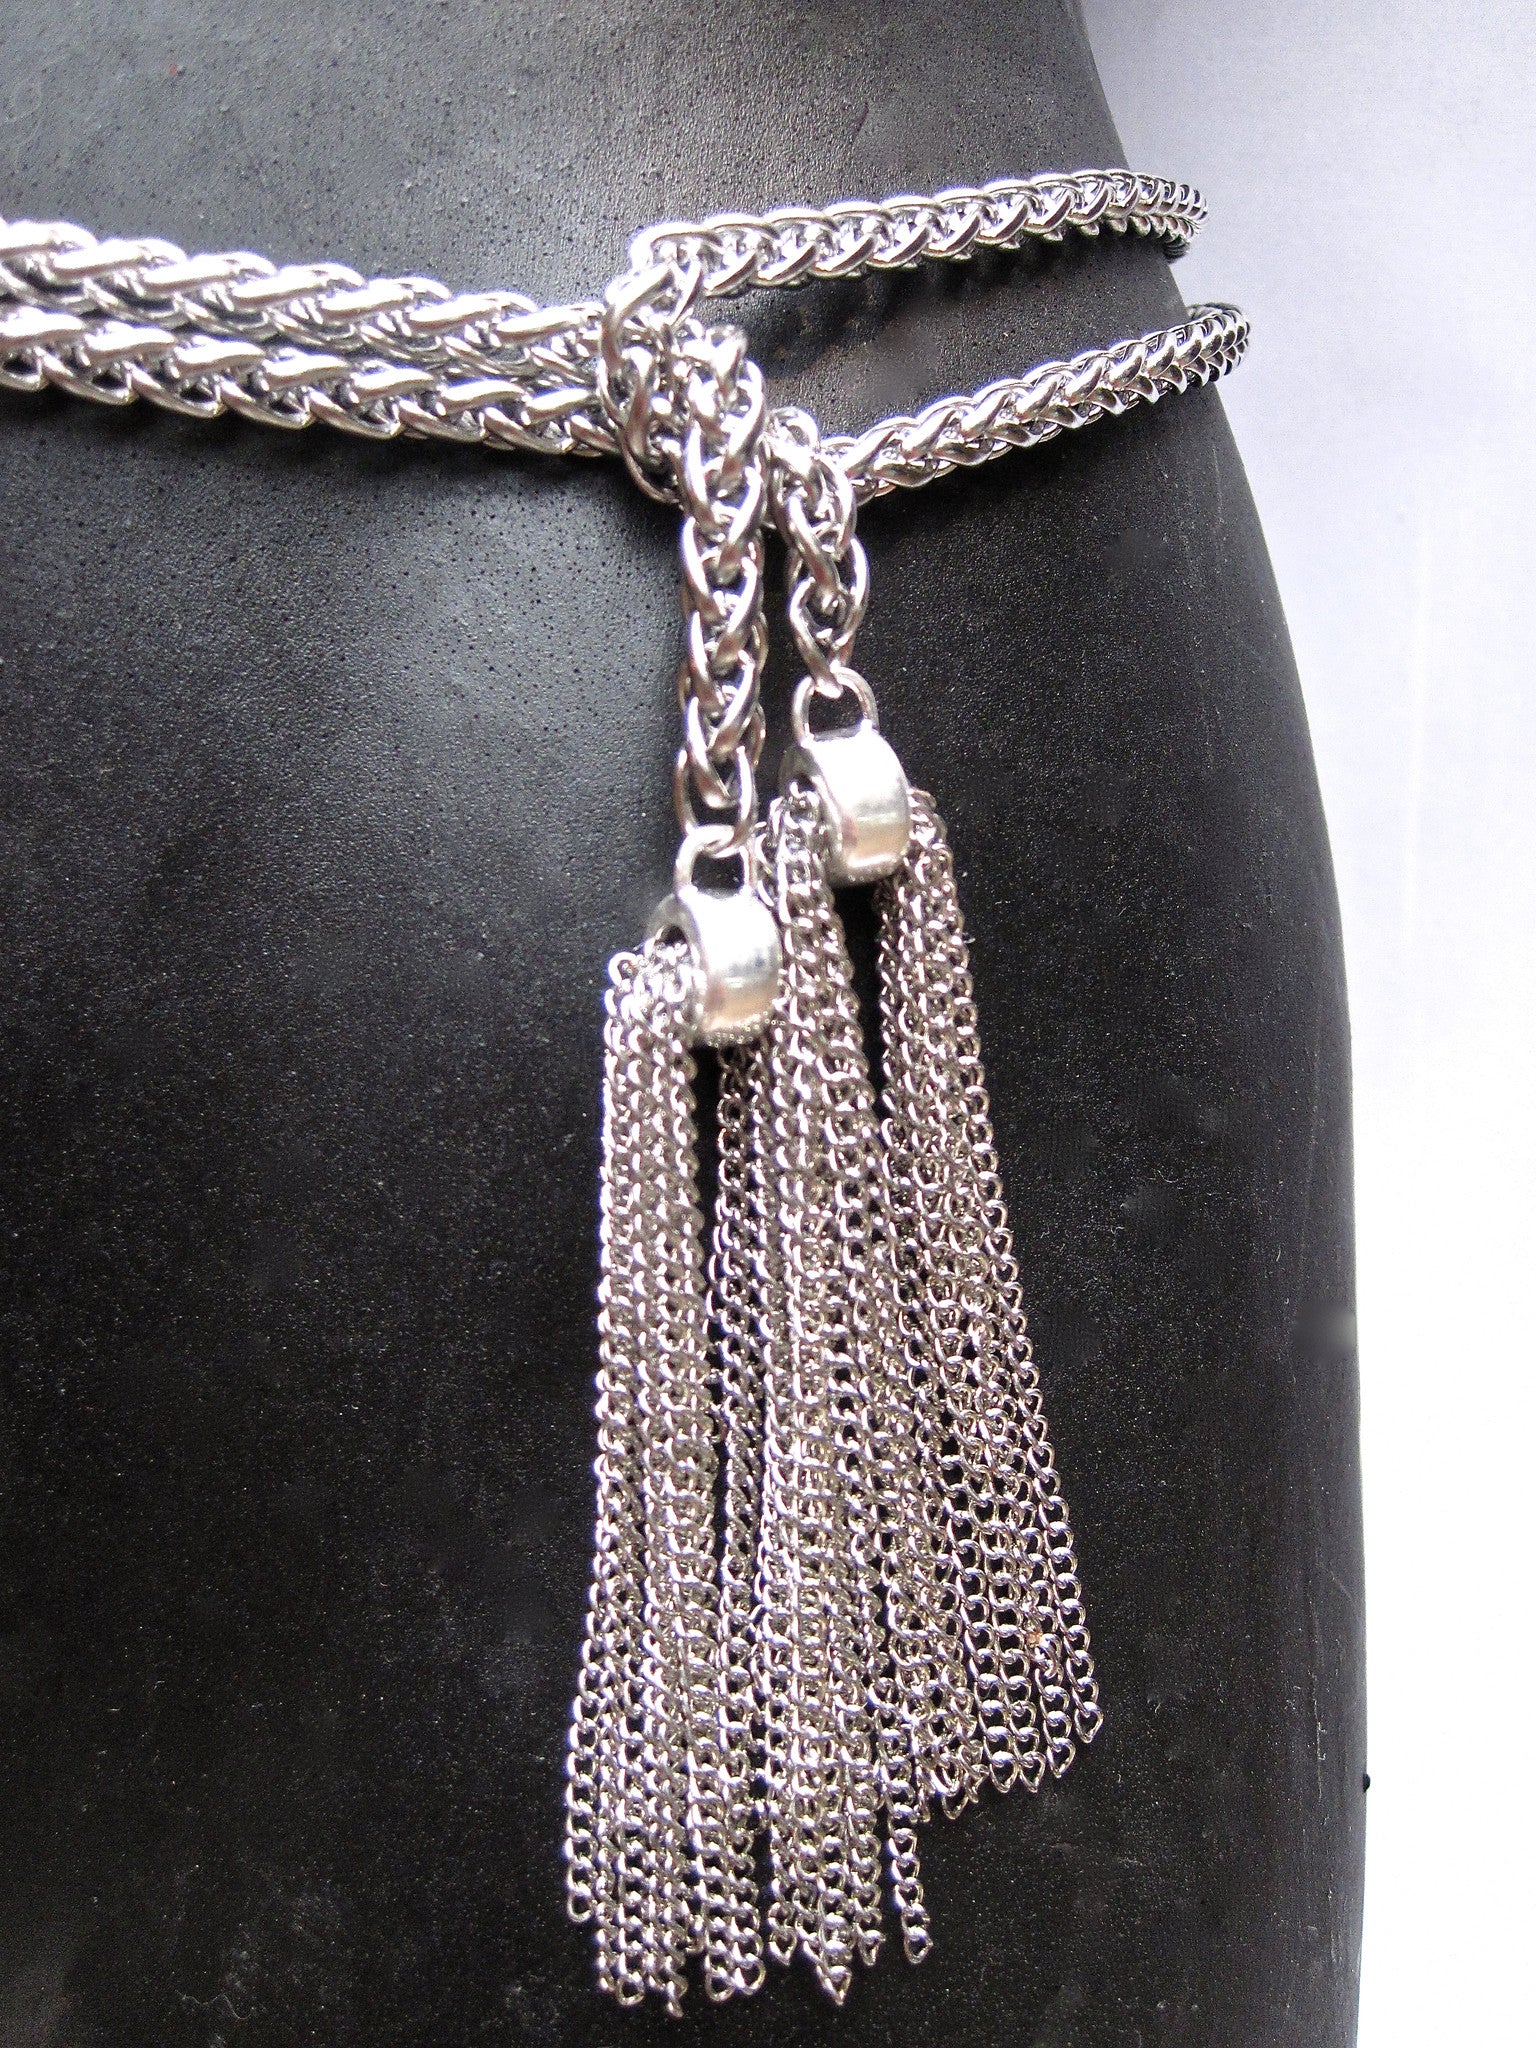 Extra Long Stainless Steel Lariat With Chain Tassels NYET Jewelry